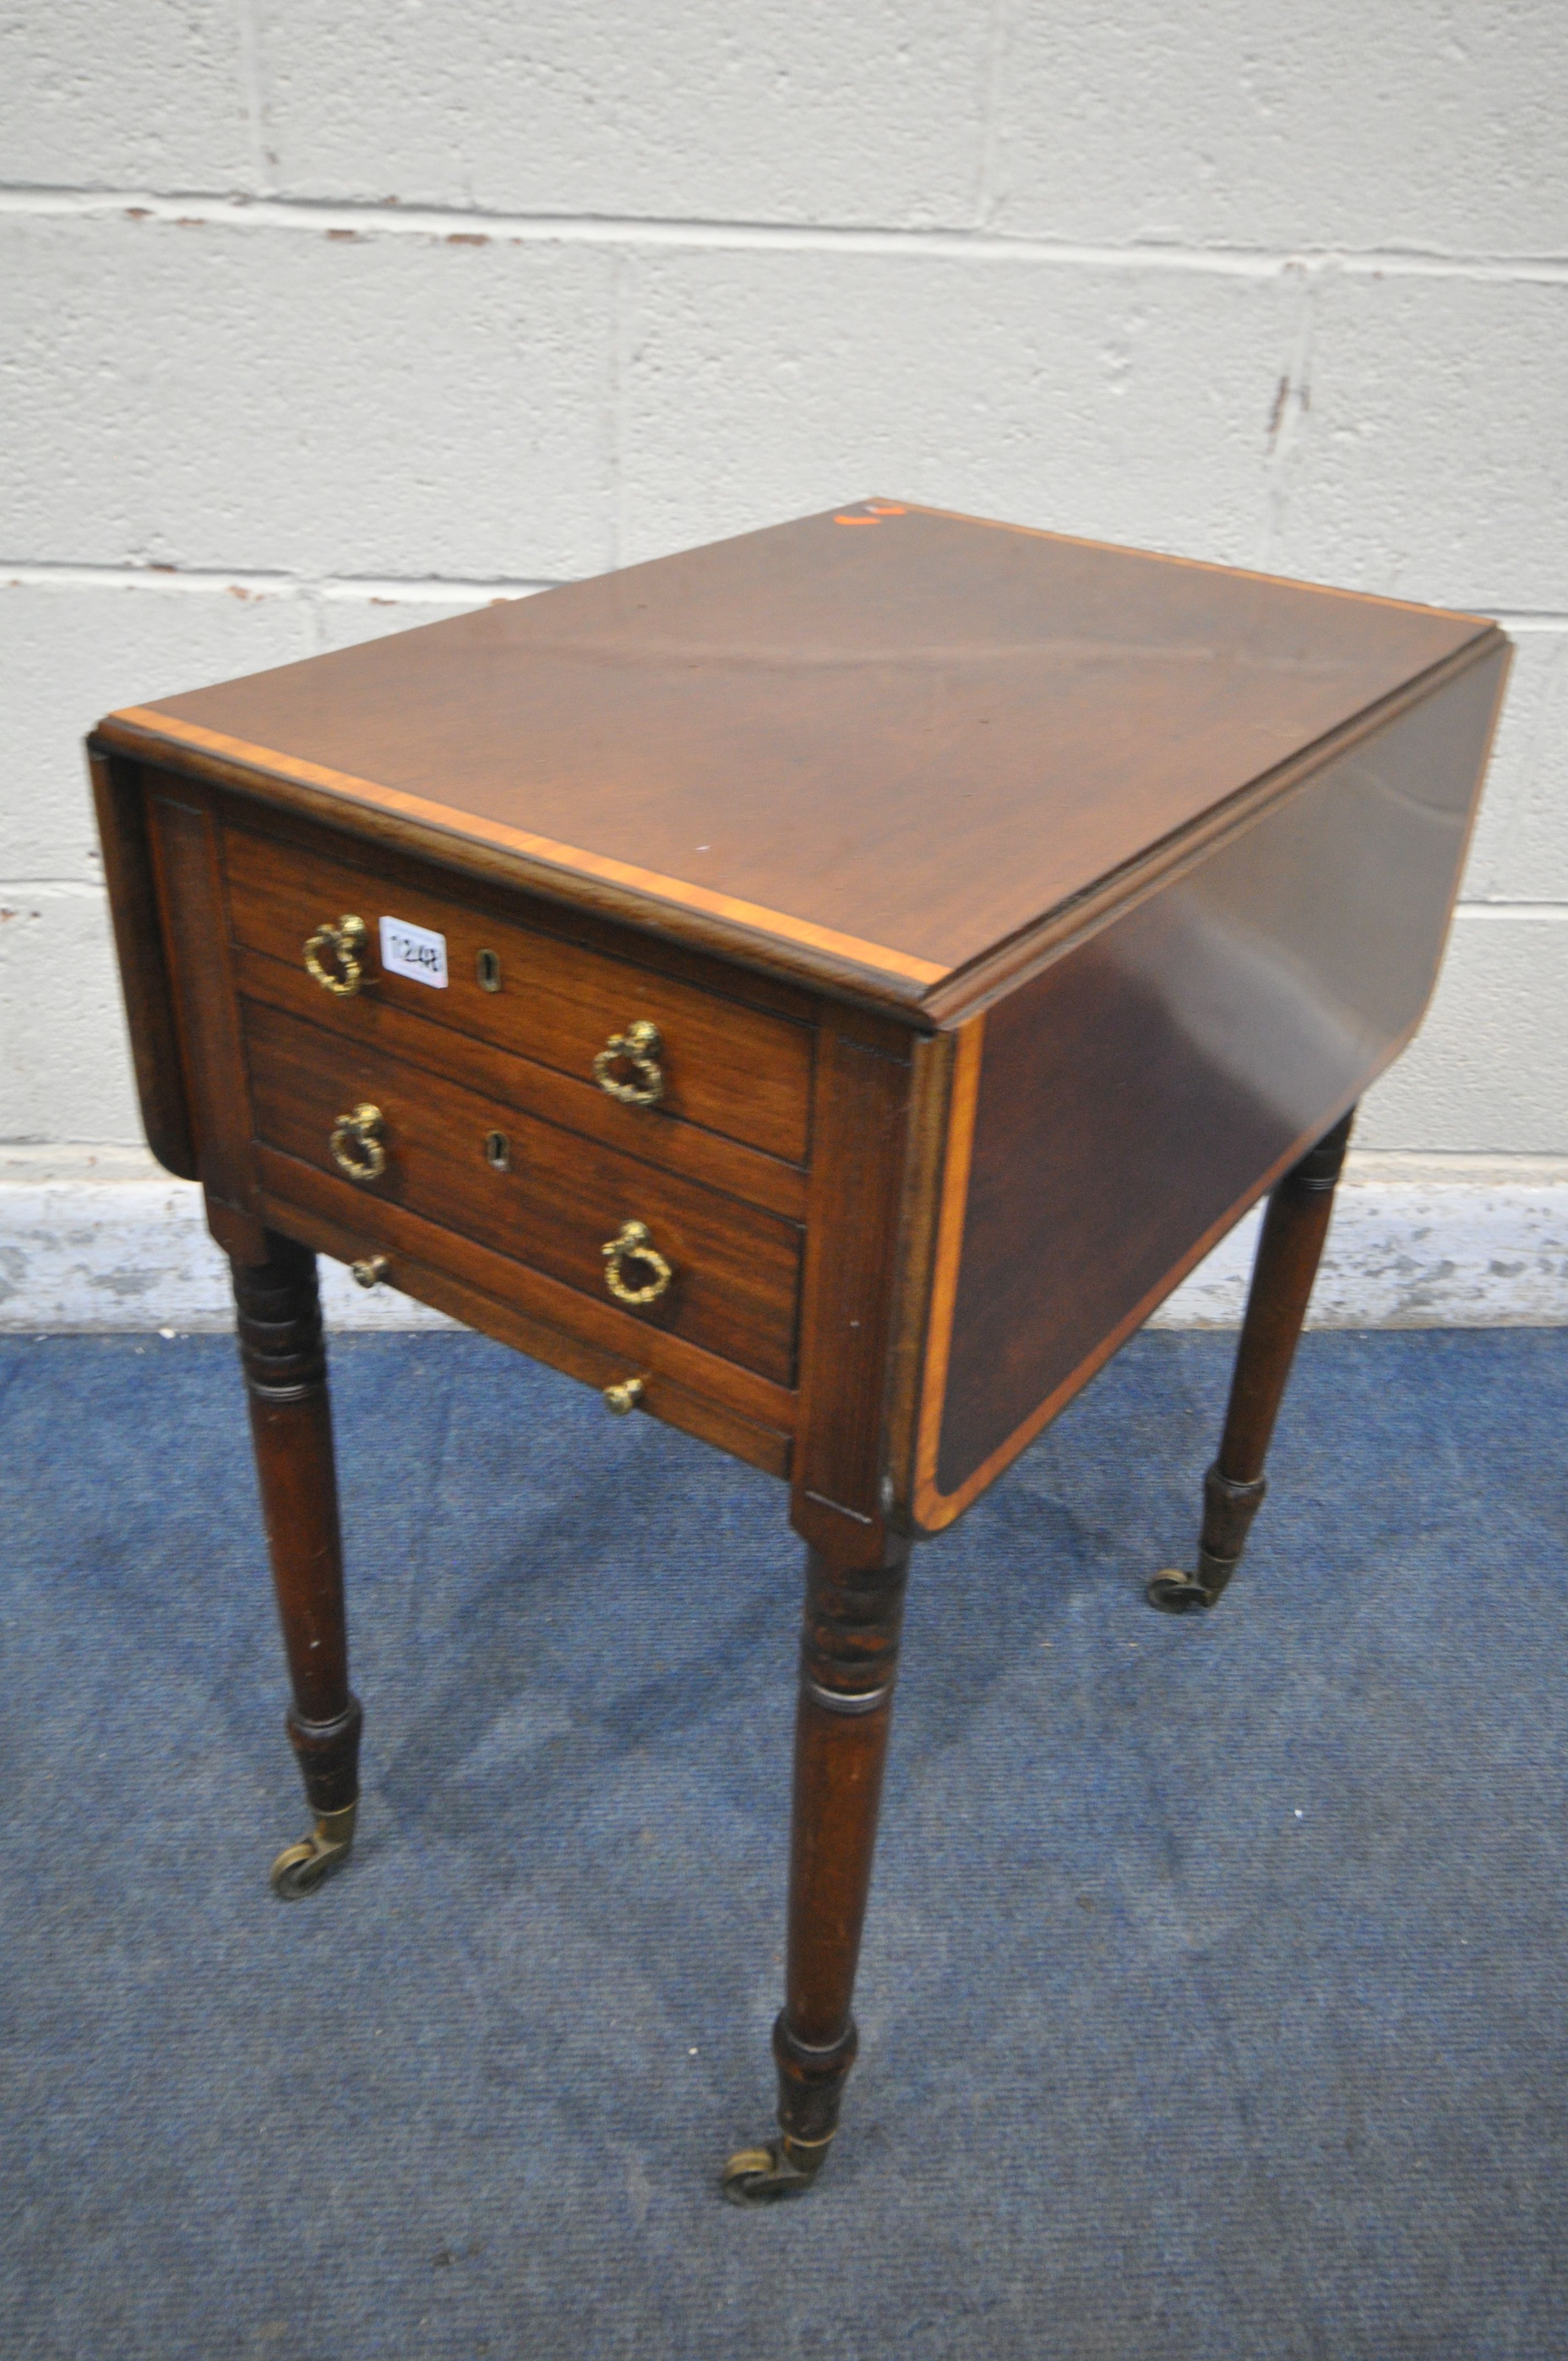 AN EDWARDIAN MAHOGANY AND CROSSBANDED DROP LEAF WORK TABLE, with two drawers, and slide, open